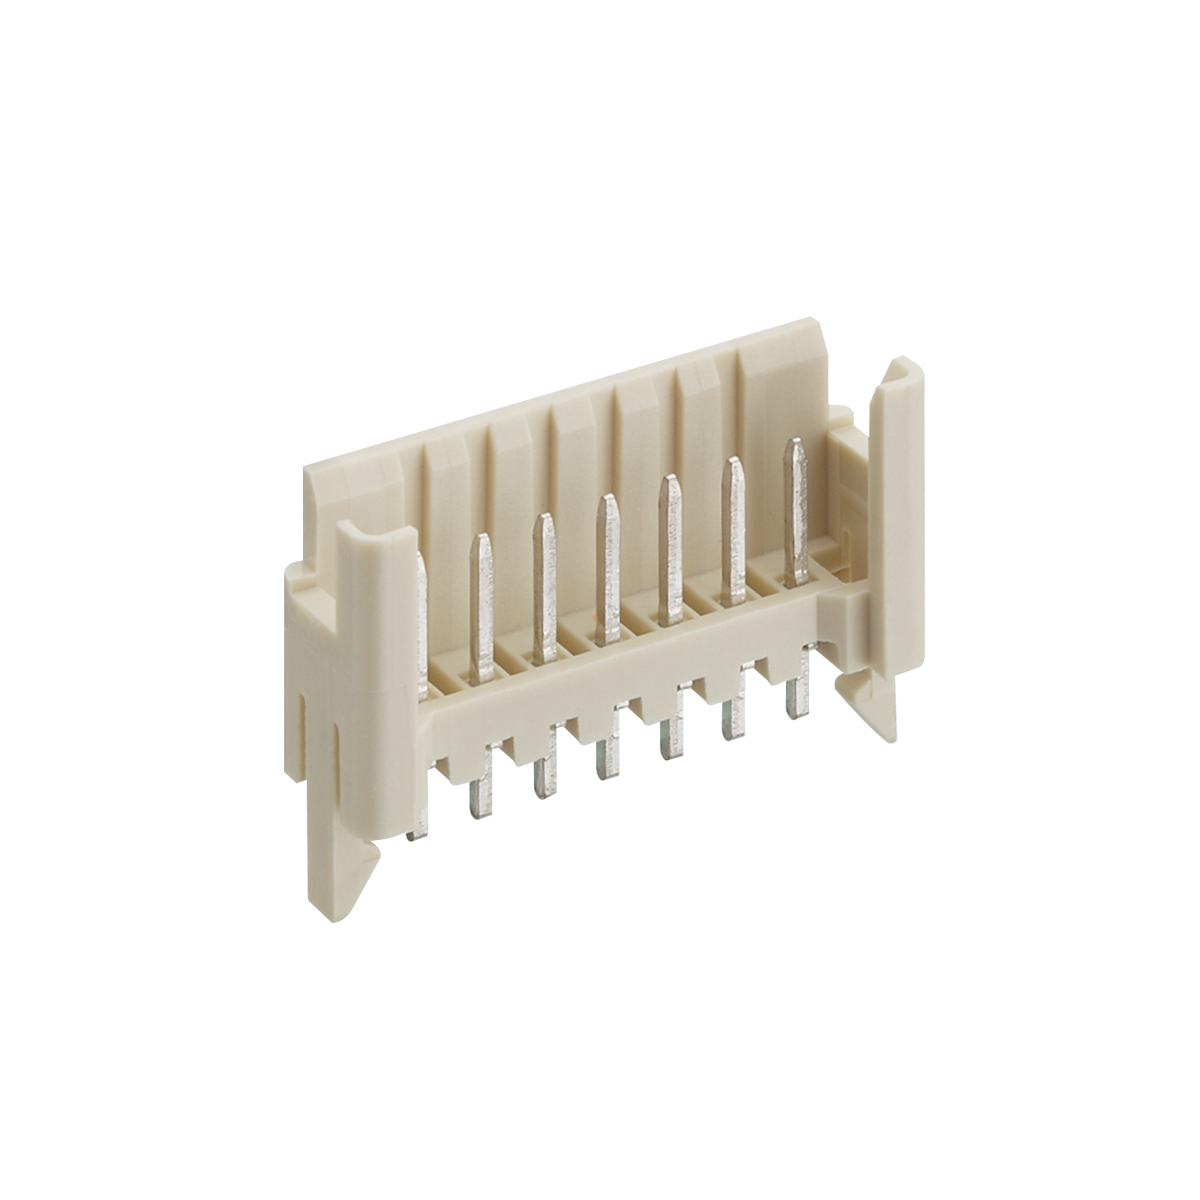 Lumberg: 3851 (Series 38 | Multimodul™ connectors, pitch 2.5 mm)